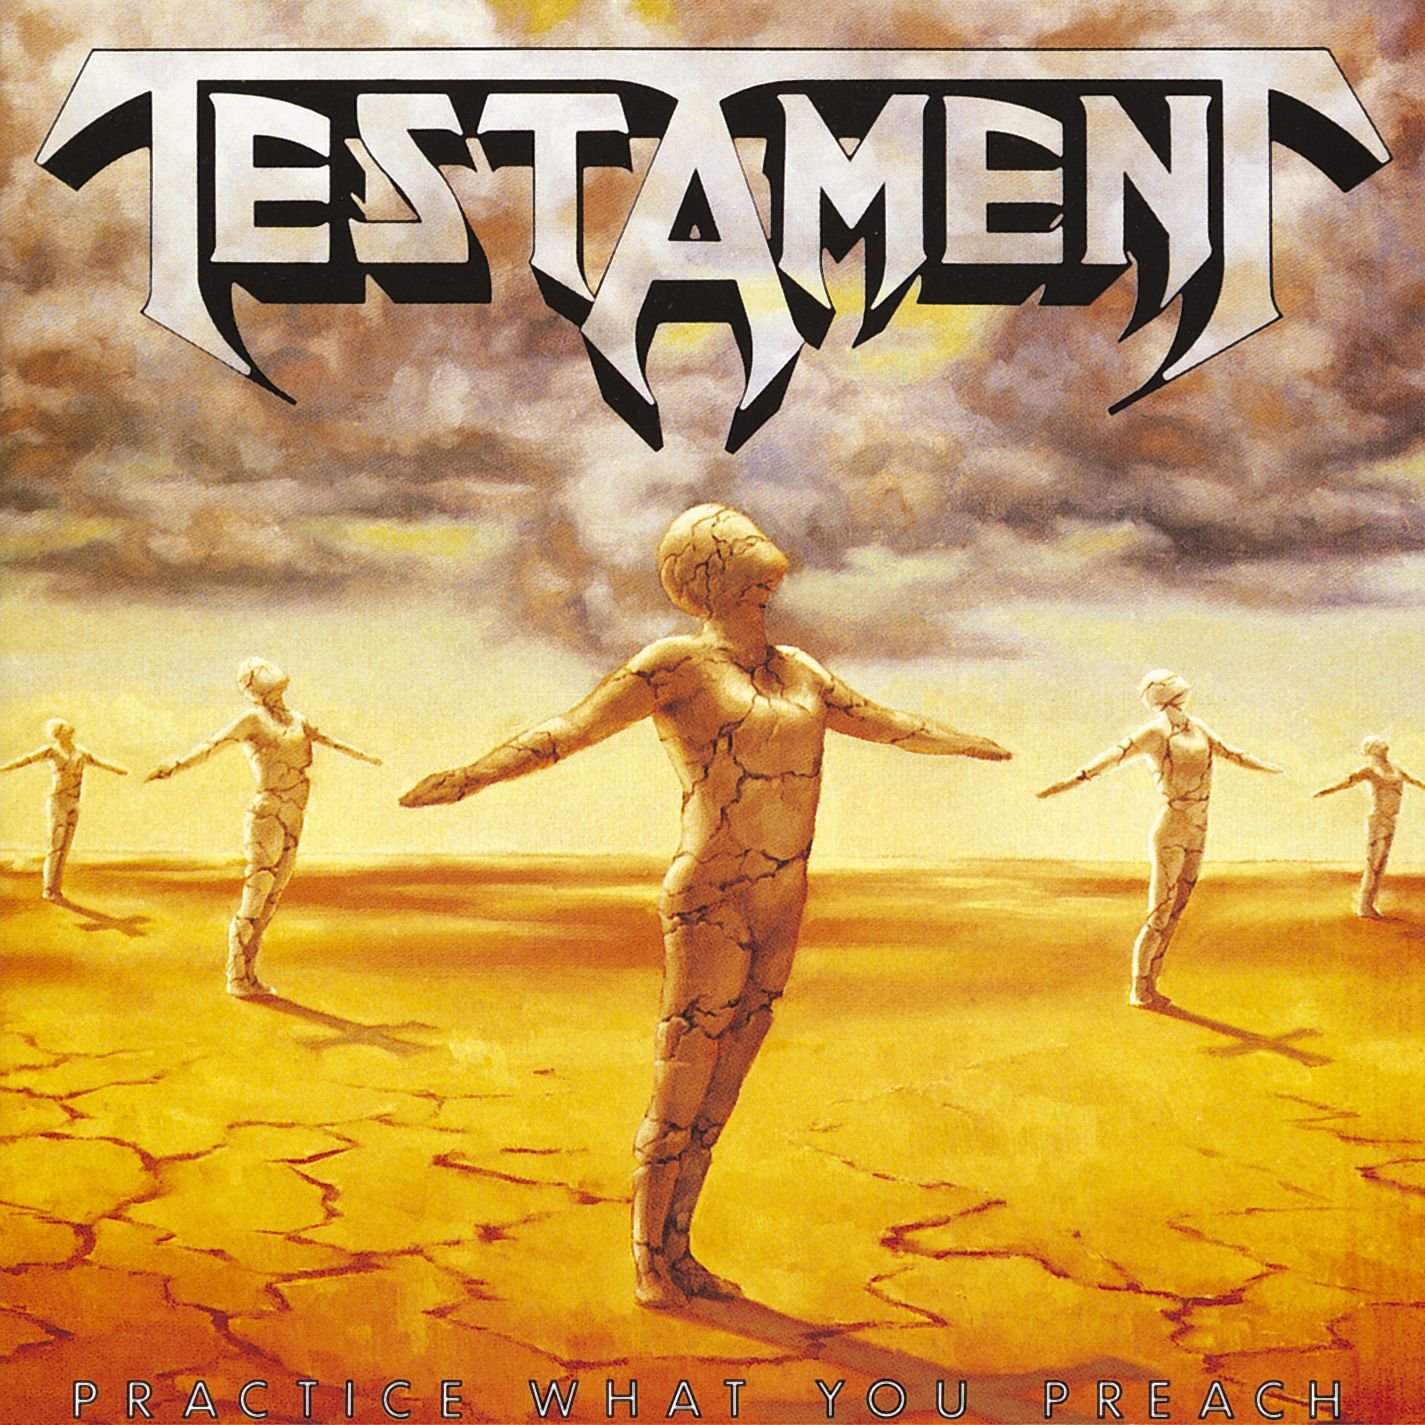 Art for Practice What You Preach by Testament